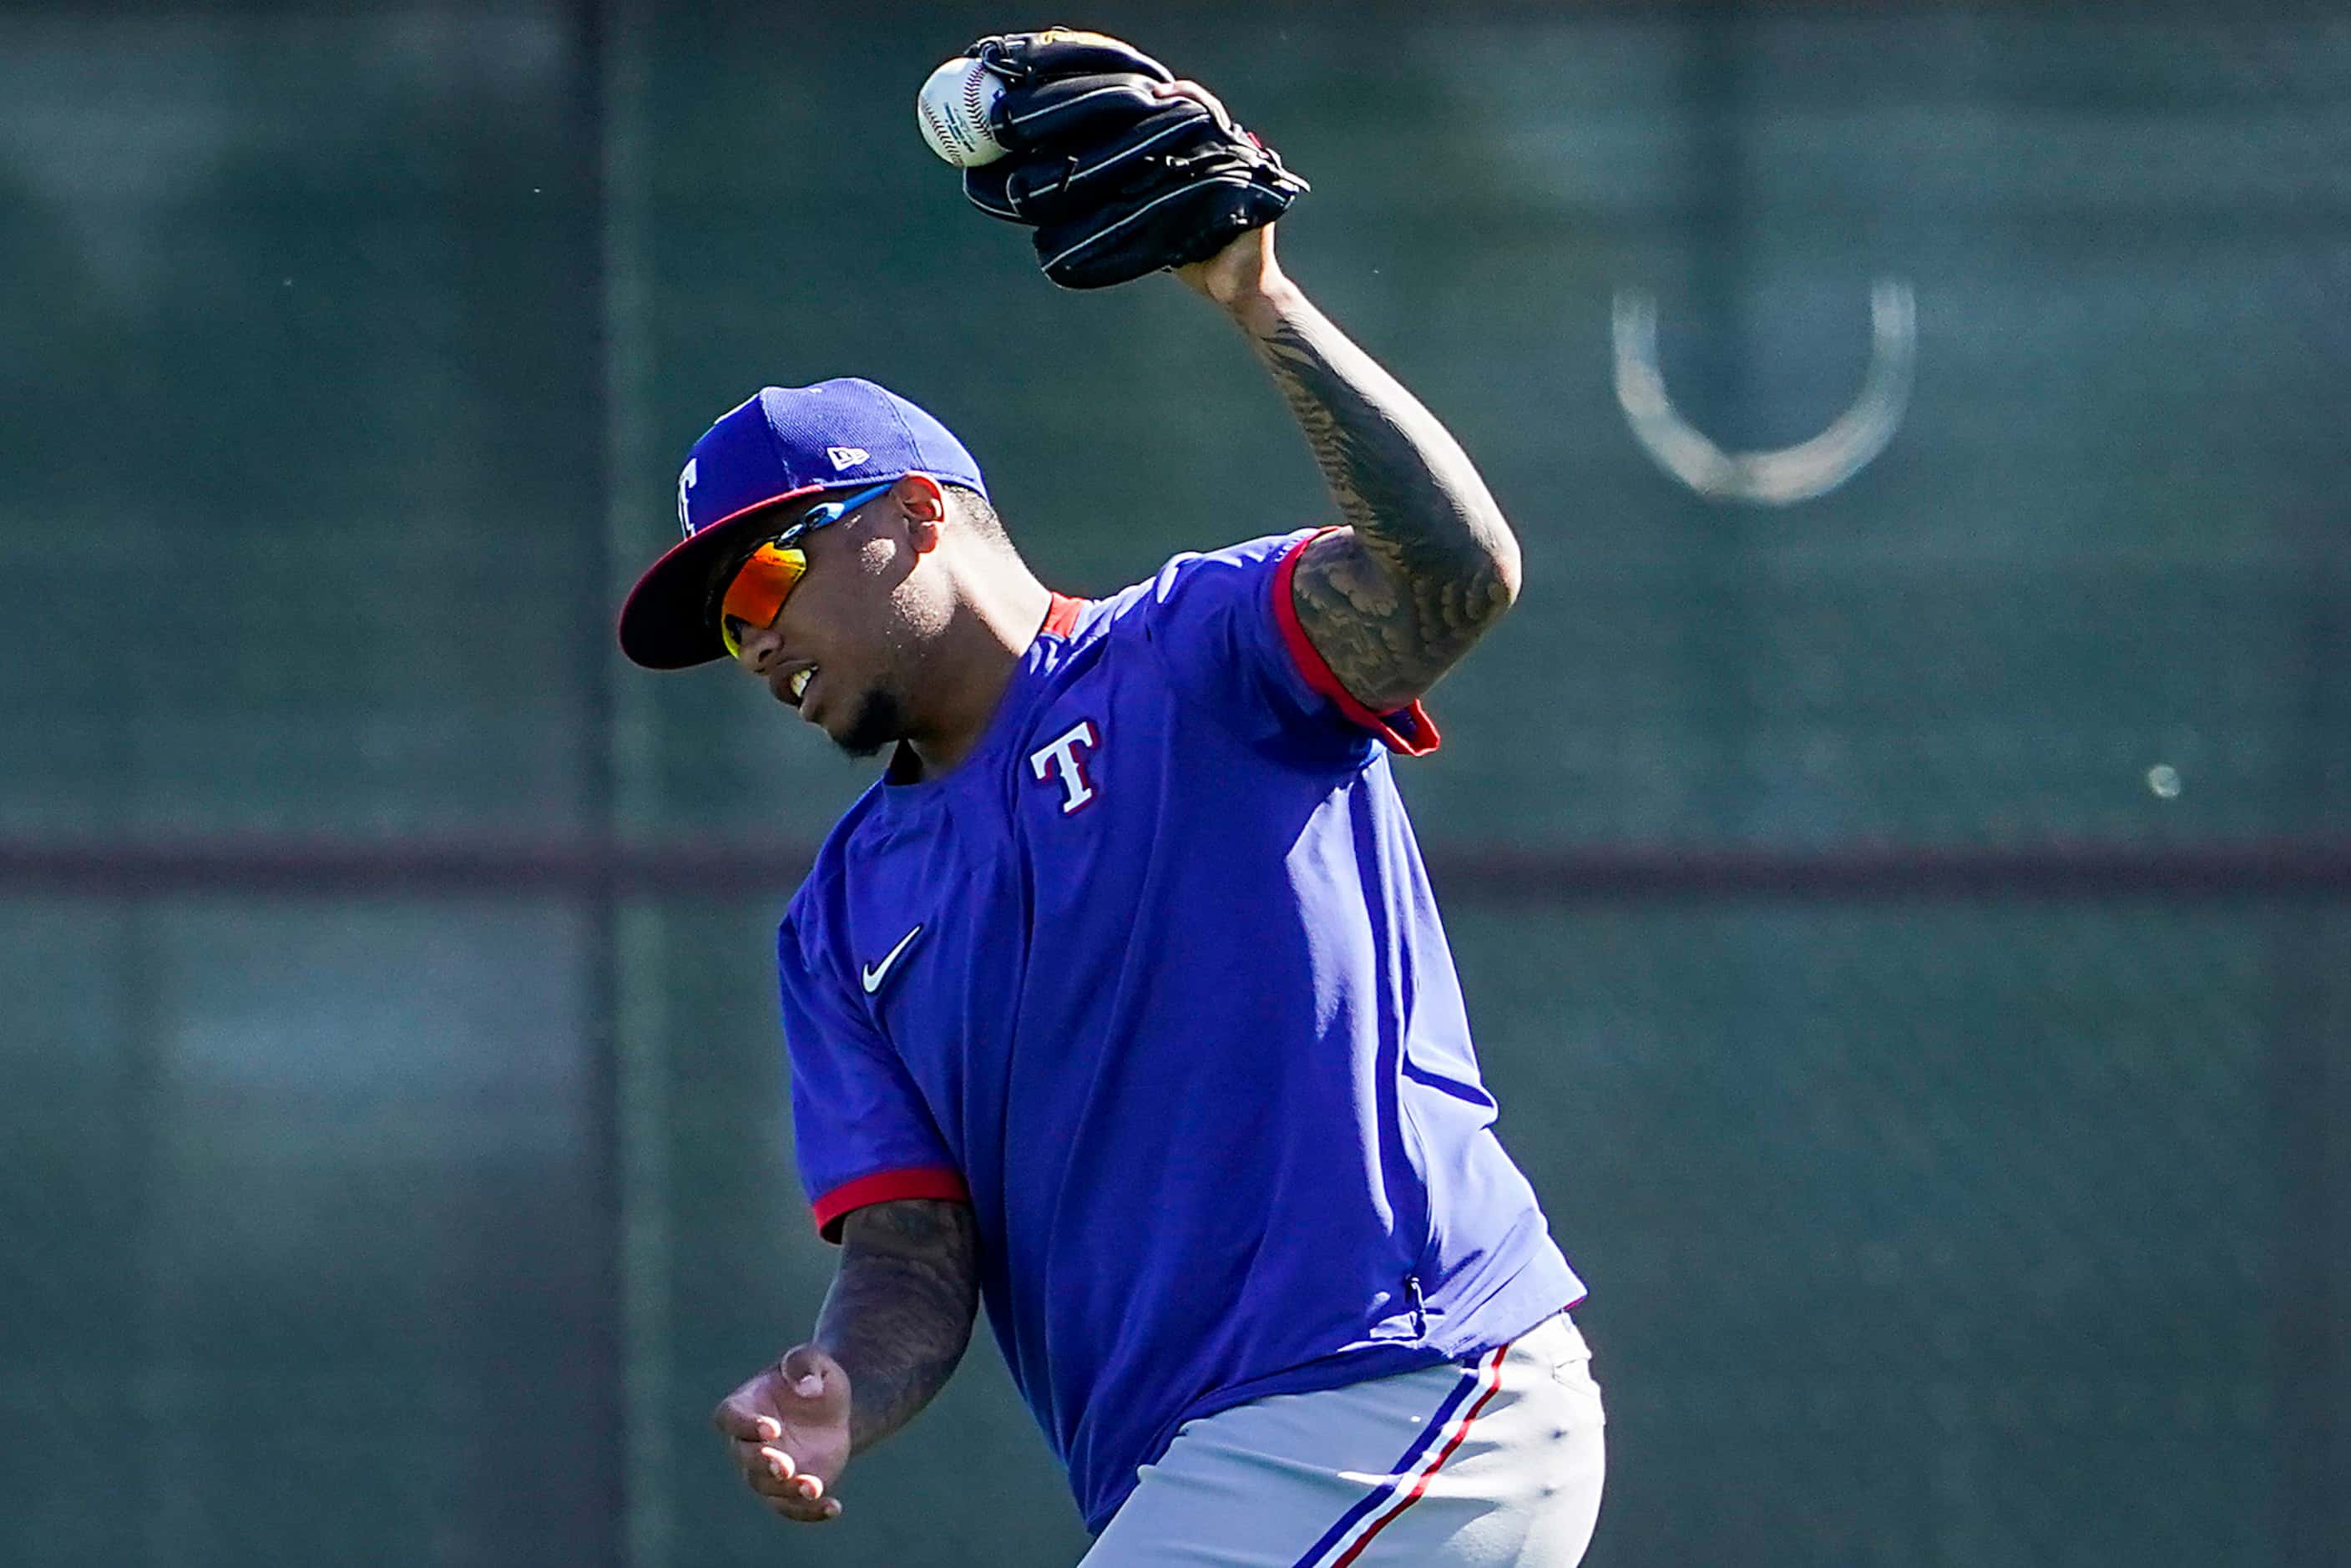 Texas Rangers outfielder Willie Calhoun makes a catch while participating in a fielding...